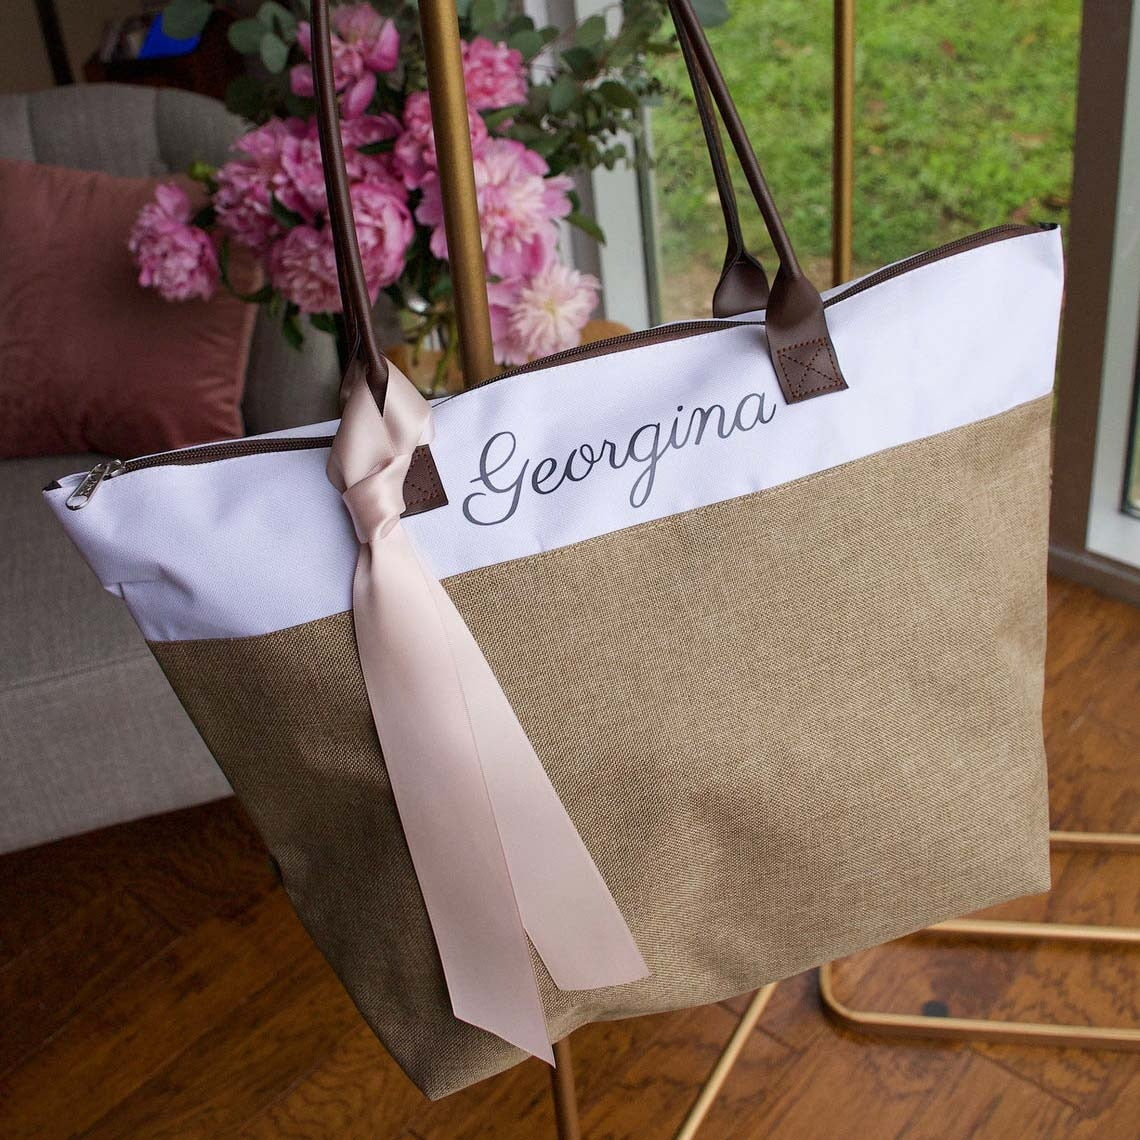 personalized tote bags with zipper